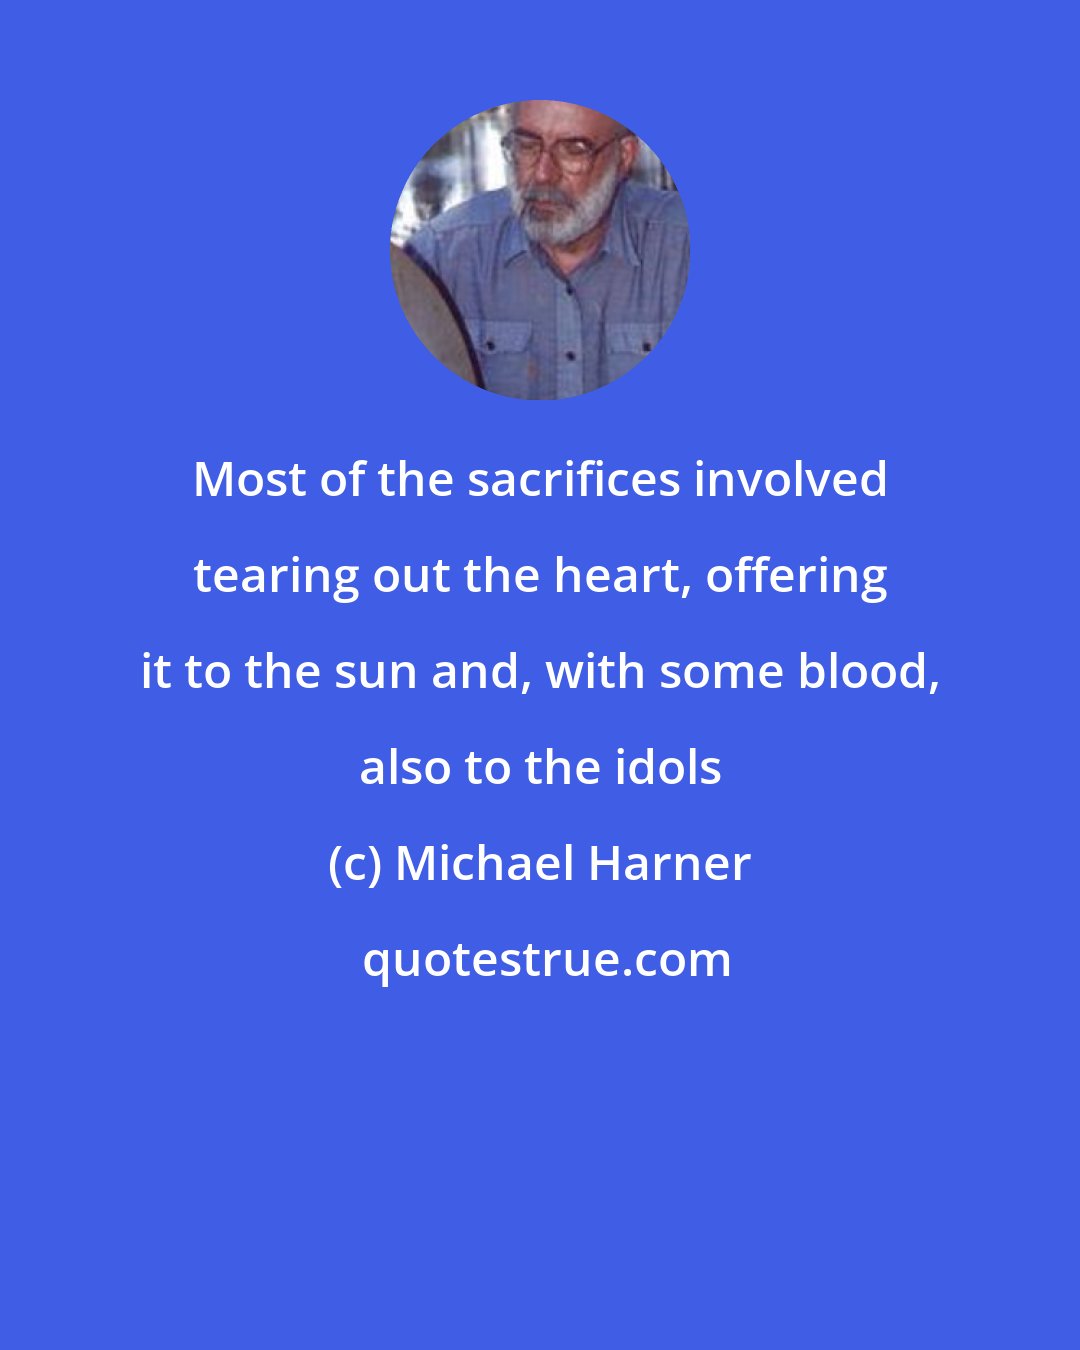 Michael Harner: Most of the sacrifices involved tearing out the heart, offering it to the sun and, with some blood, also to the idols